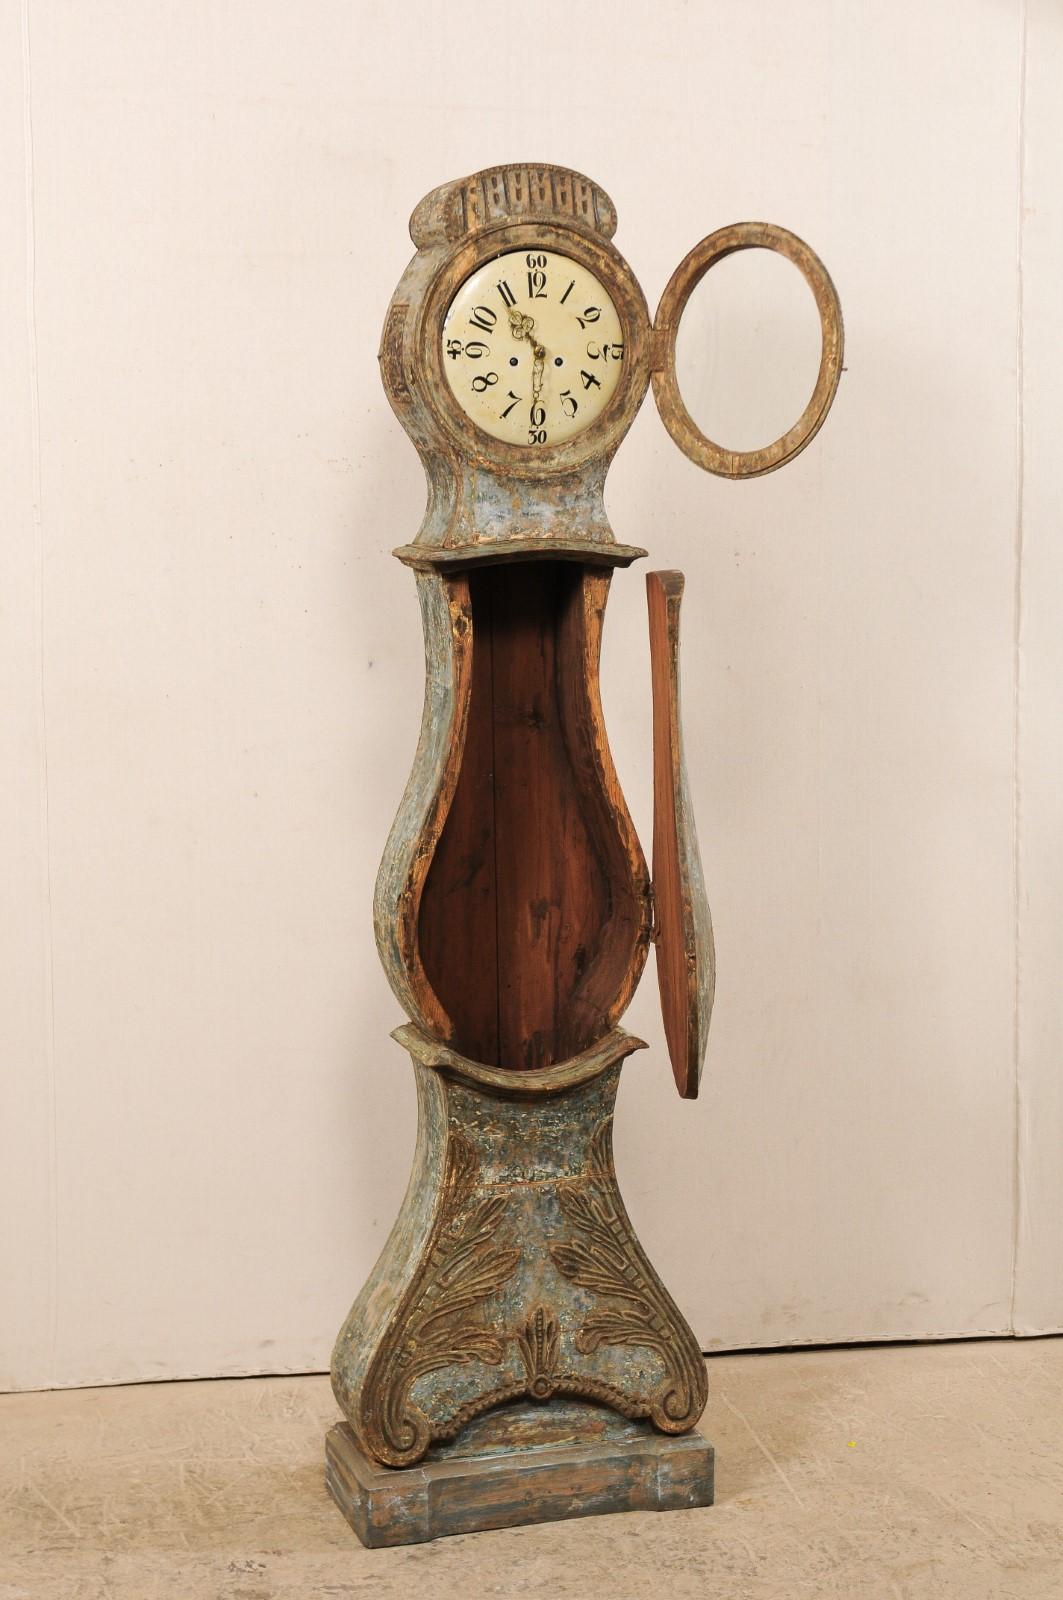 Exquisite 19th Century Swedish Wood Floor Clock with Wonderful Carved Accents 1